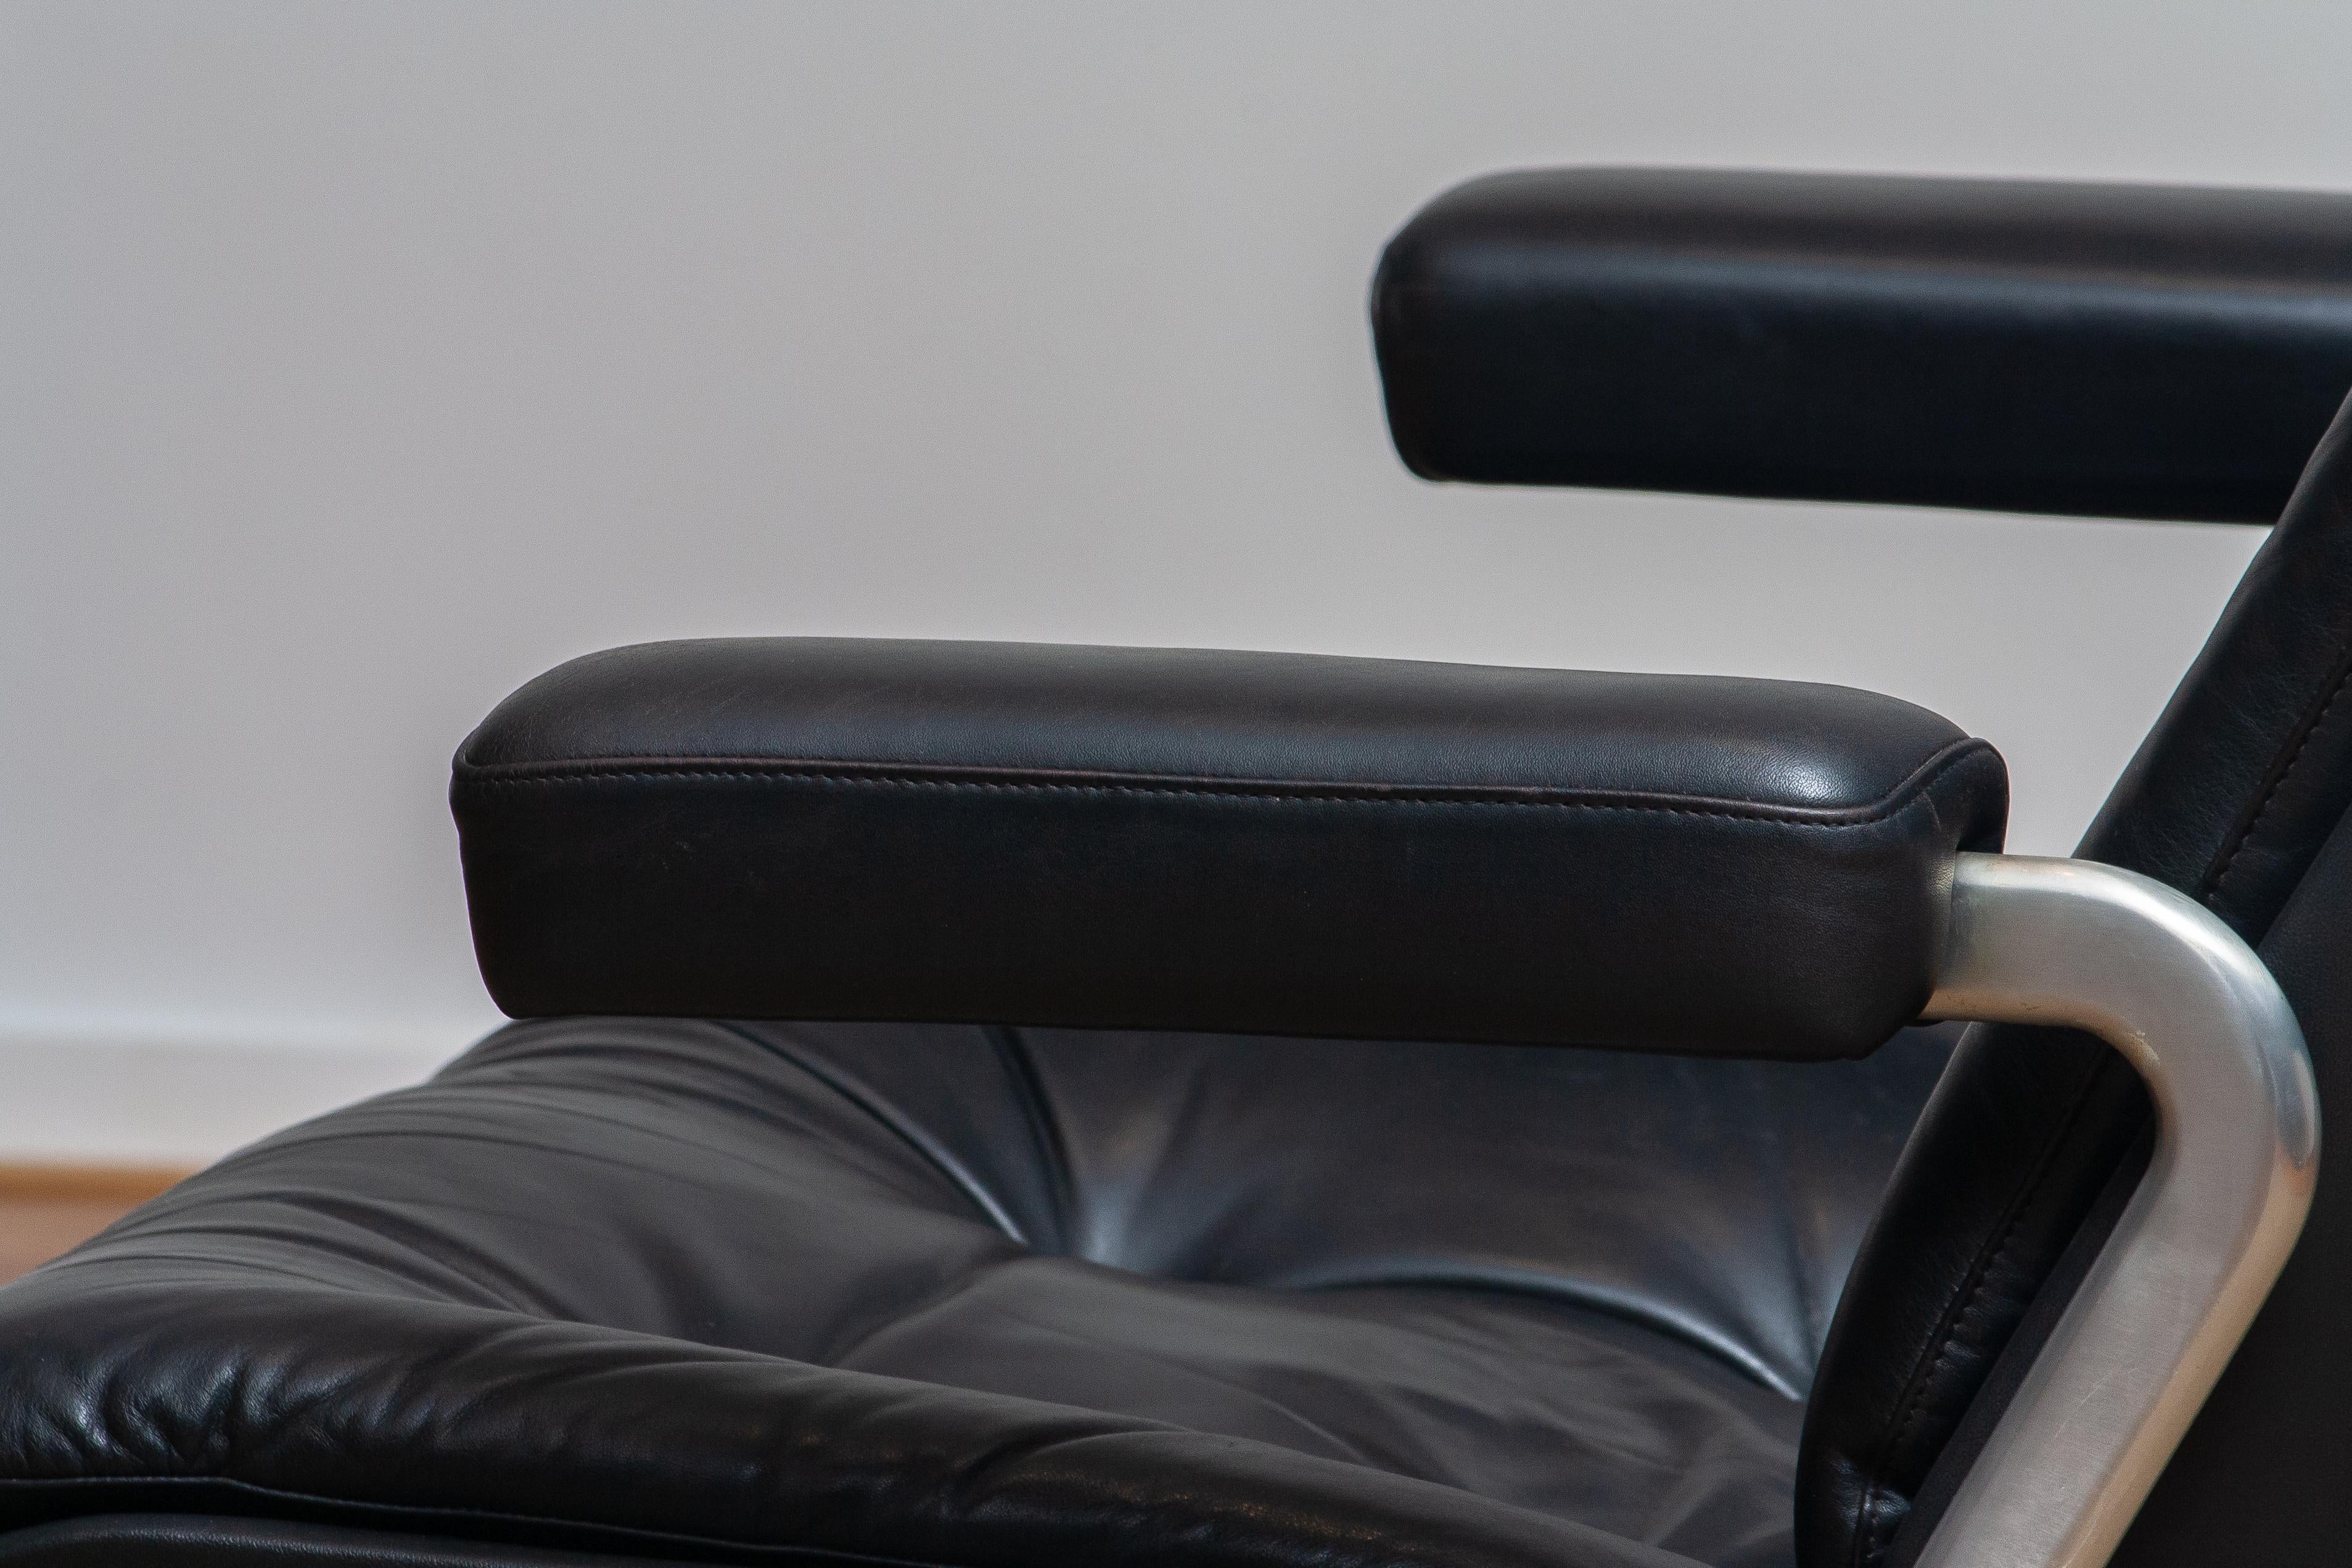 Mid-Century Modern 1960s, Black Leather Swivel Chair by Martin Stoll for Giroflex Stoll Mdl, 7065